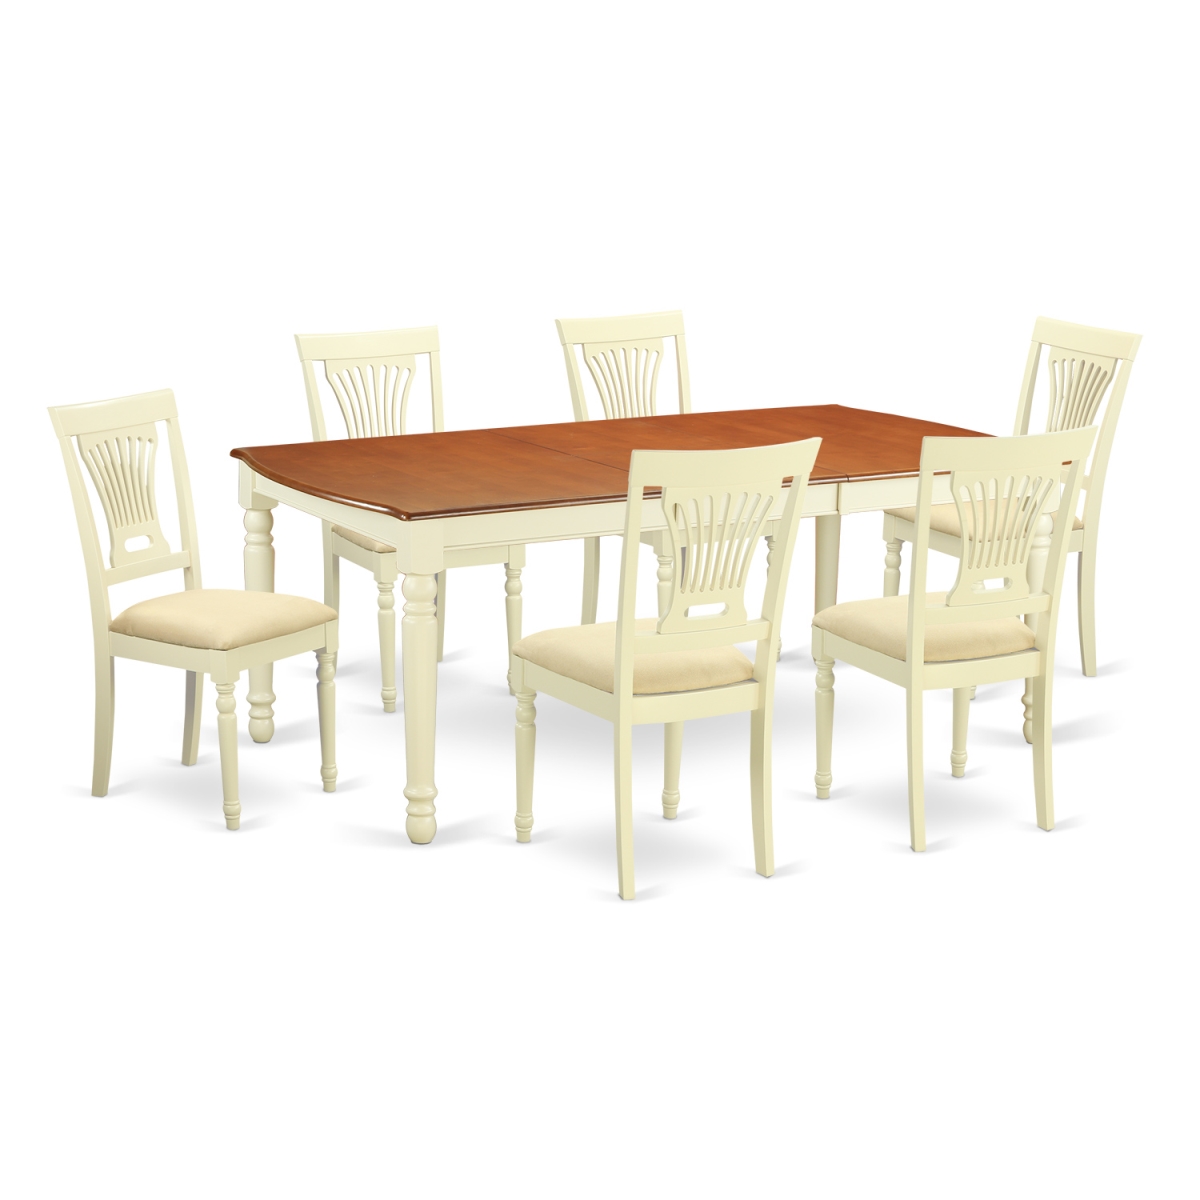 DOPL7-WHI-C Dinette Set - Dining Table & 6 Chairs, Buttermilk & Cherry - 7 Piece -  East West Furniture